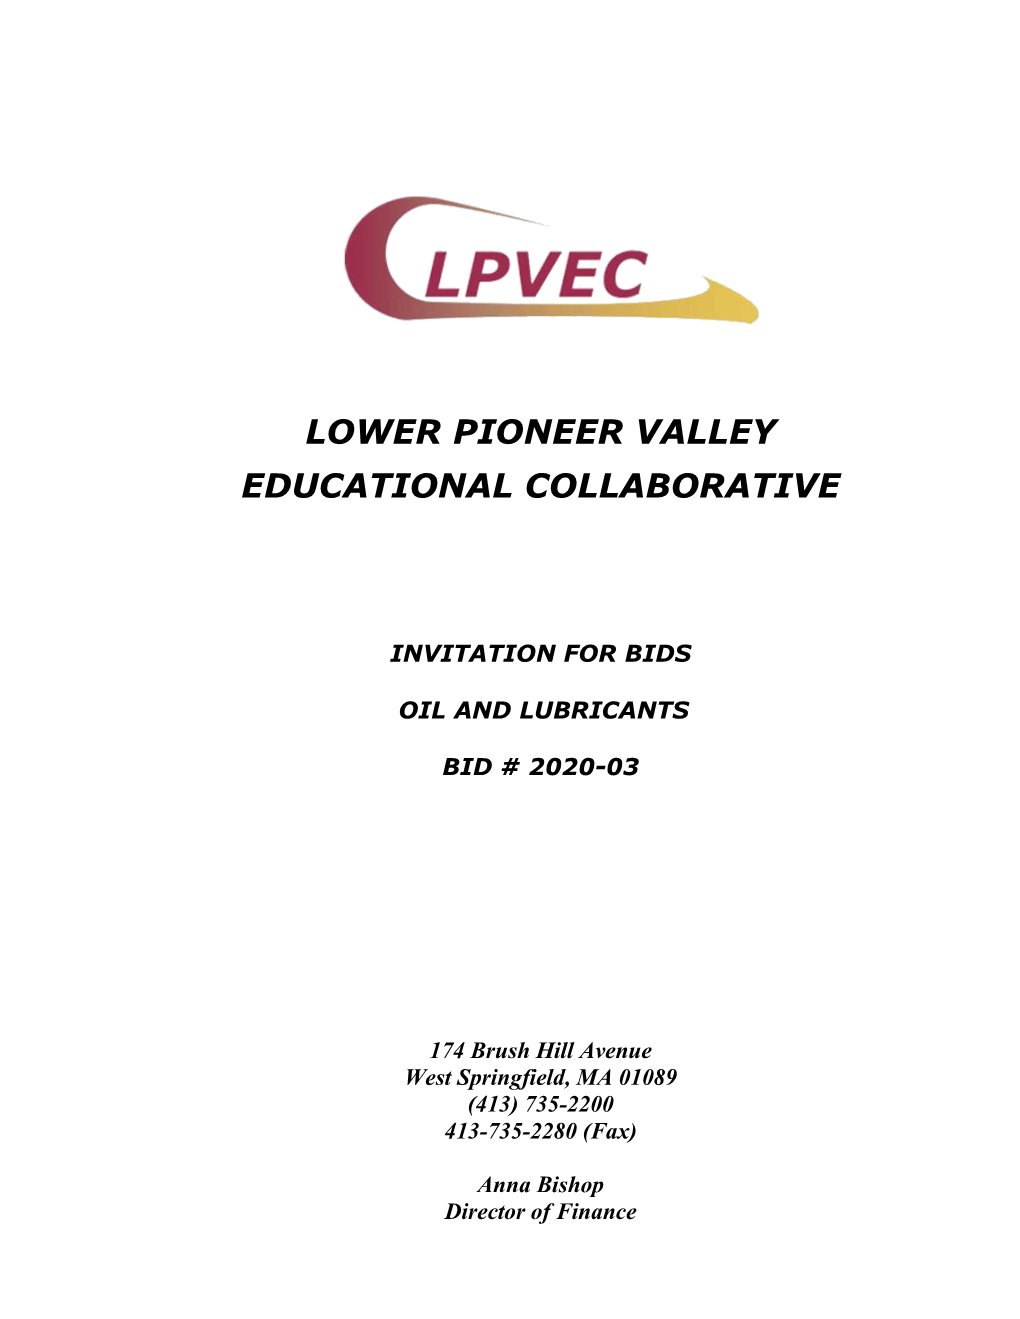 The Lower Pioneer Valley Educational Collaborative (LPVEC) Is Seeking Bids for the Purchase of Oil and Lubricants for Various Size School Buses/Vehicles